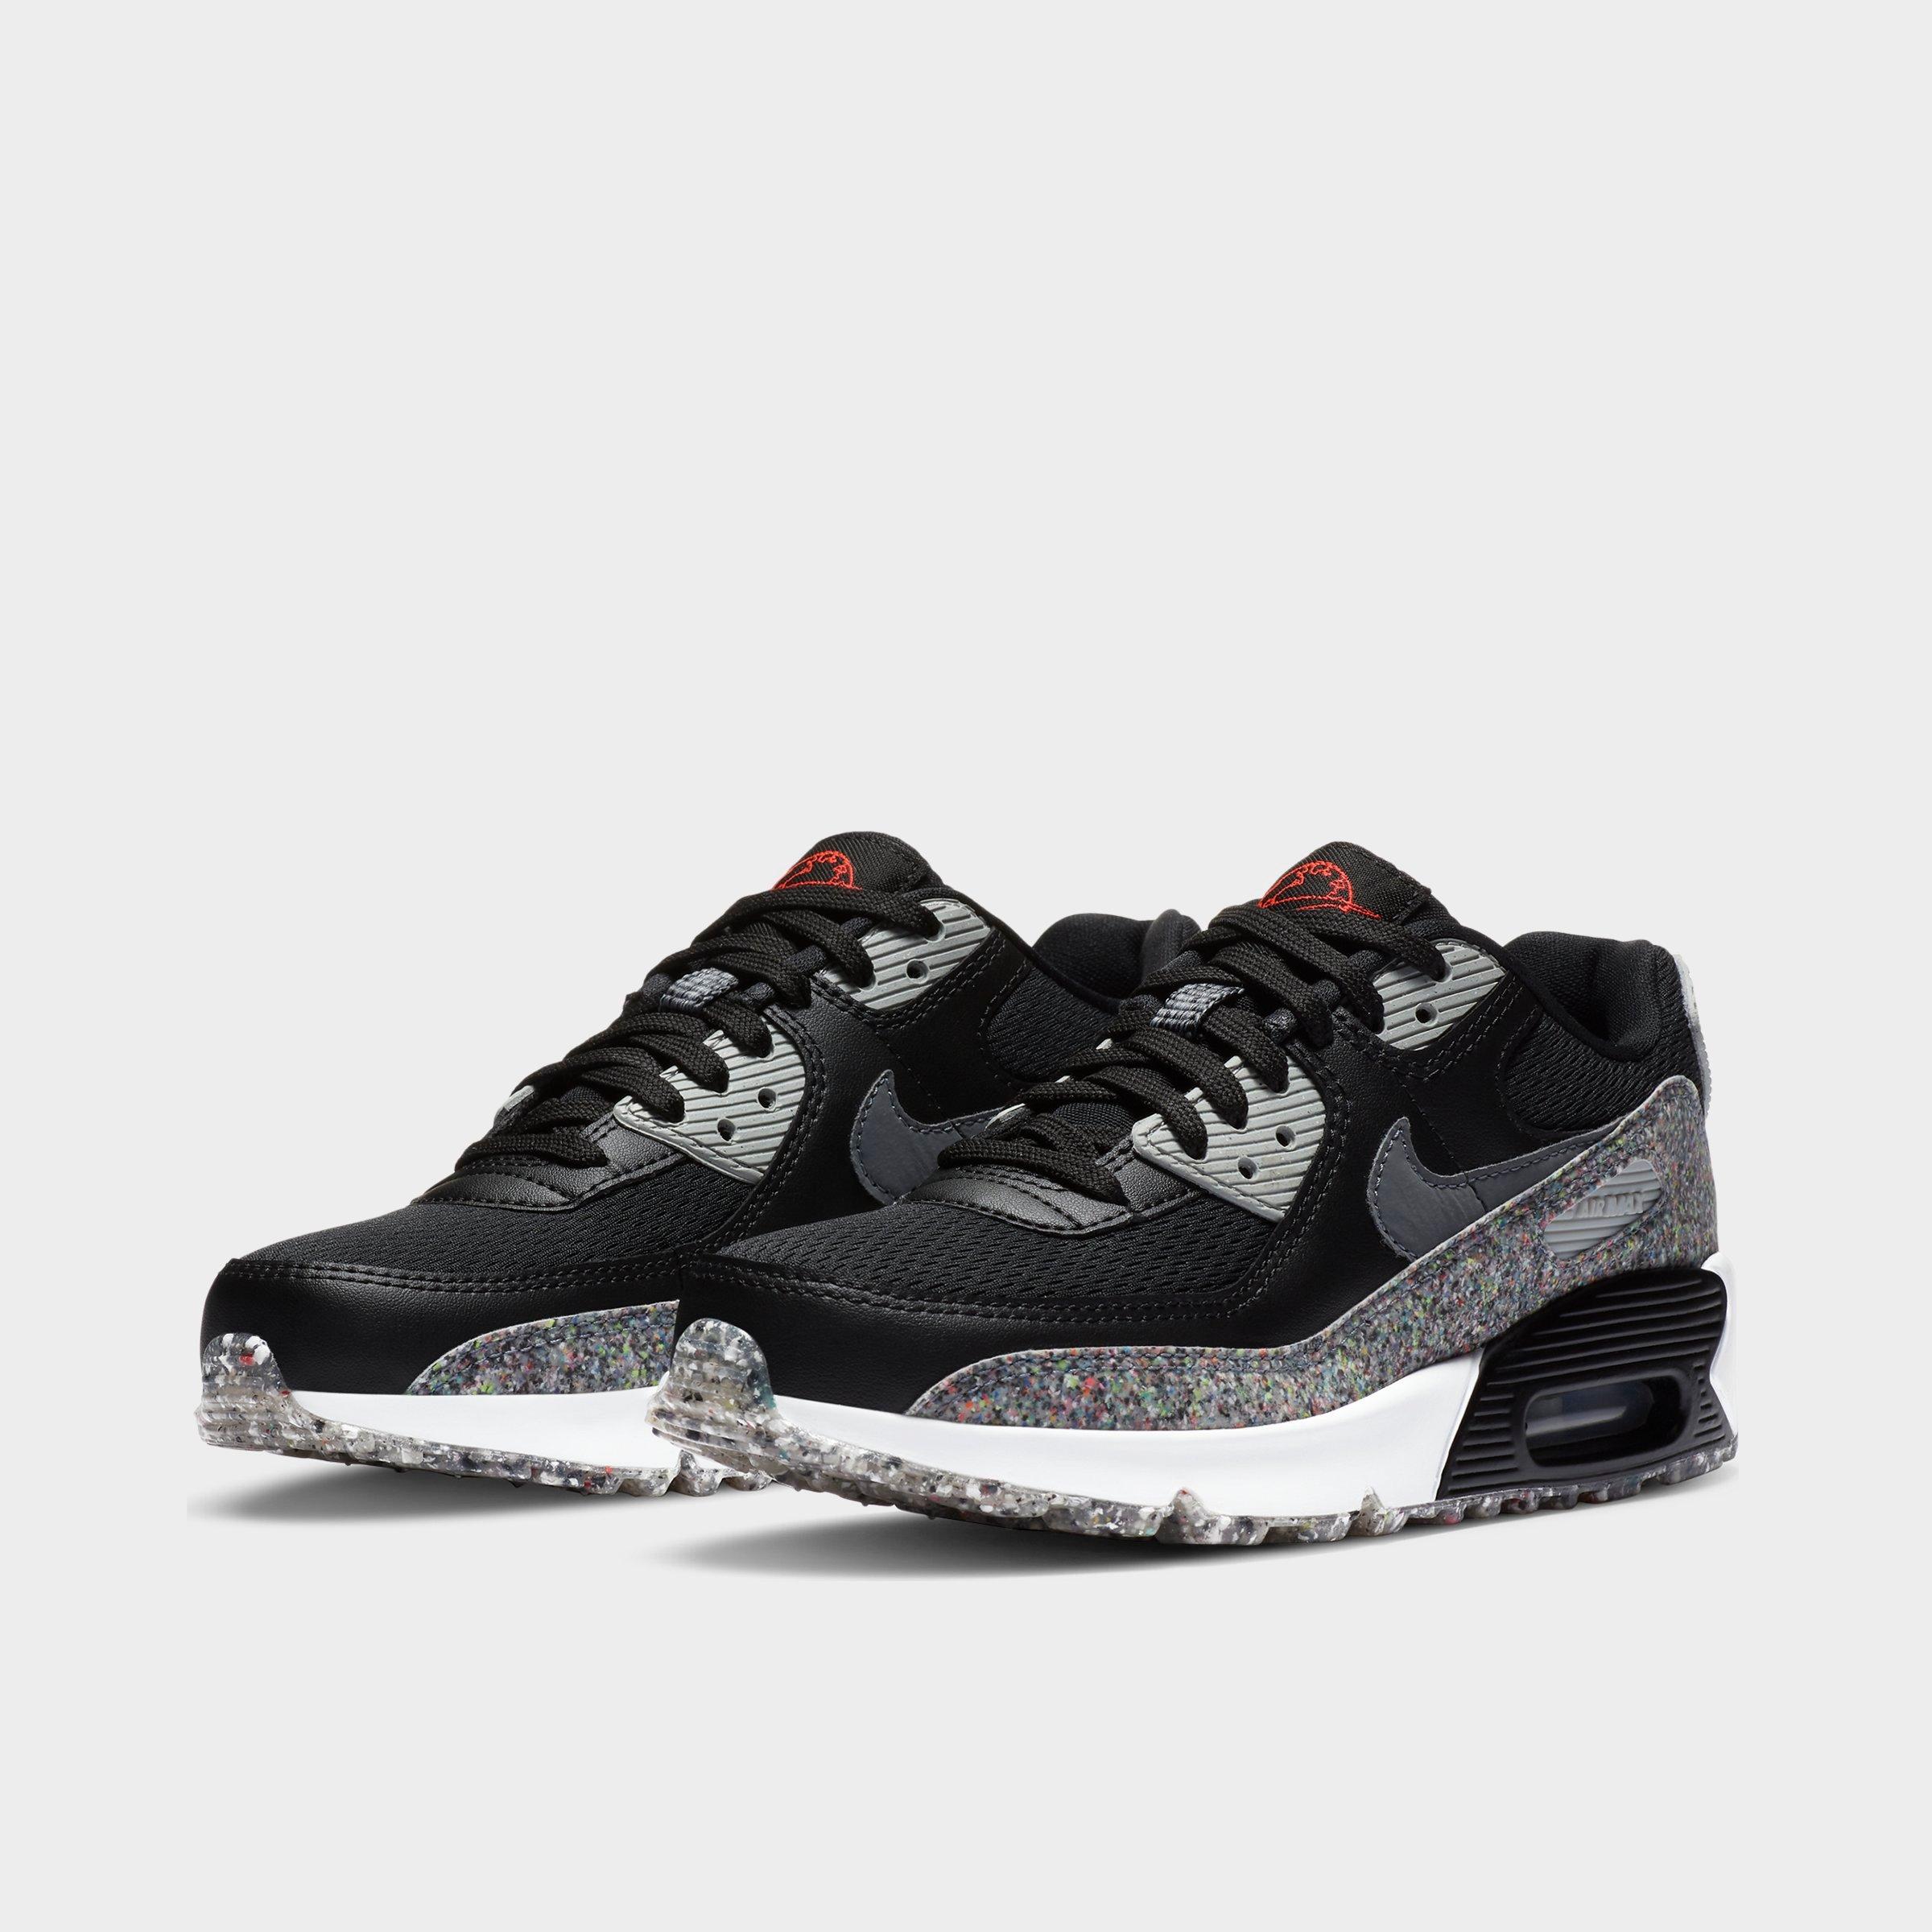 air max 90 speckled